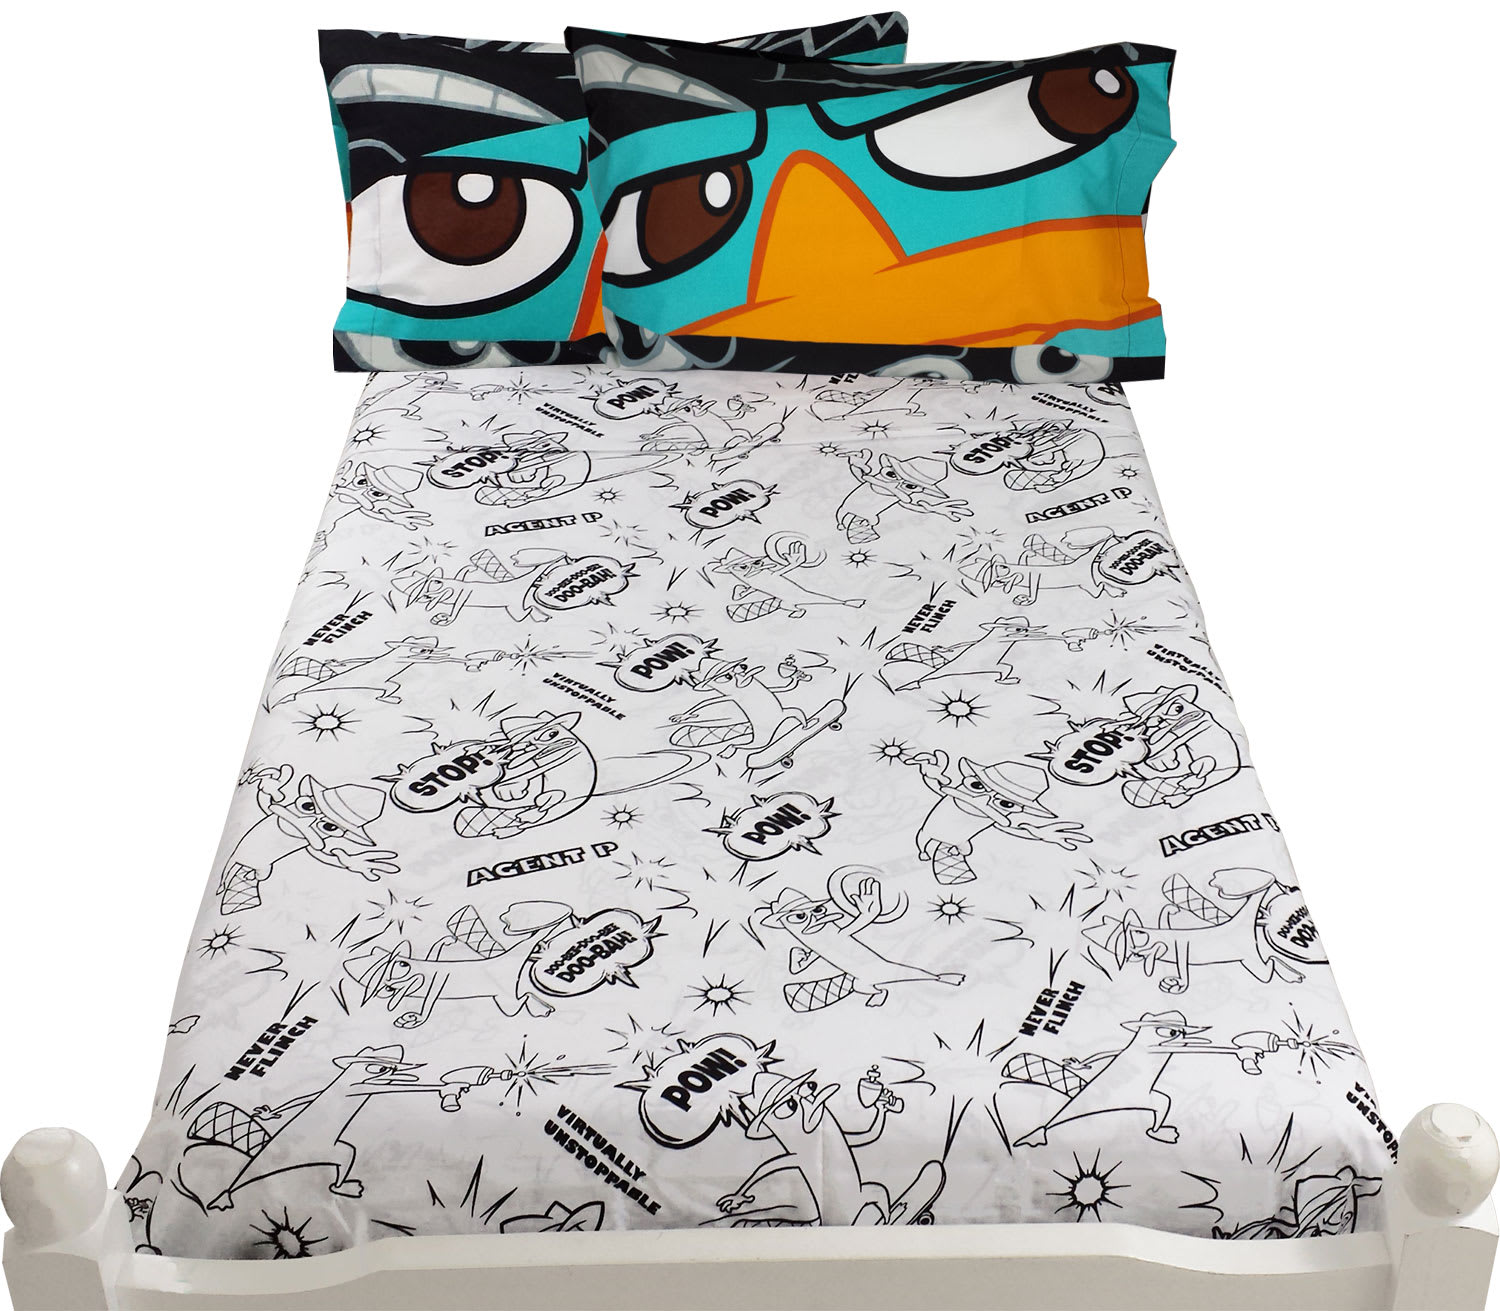 Disney Agent P Full Bed Sheet Set - 4pc Perry the Platypus Bedding Accessories by oBedding.com - Verified Purchase Review Channel